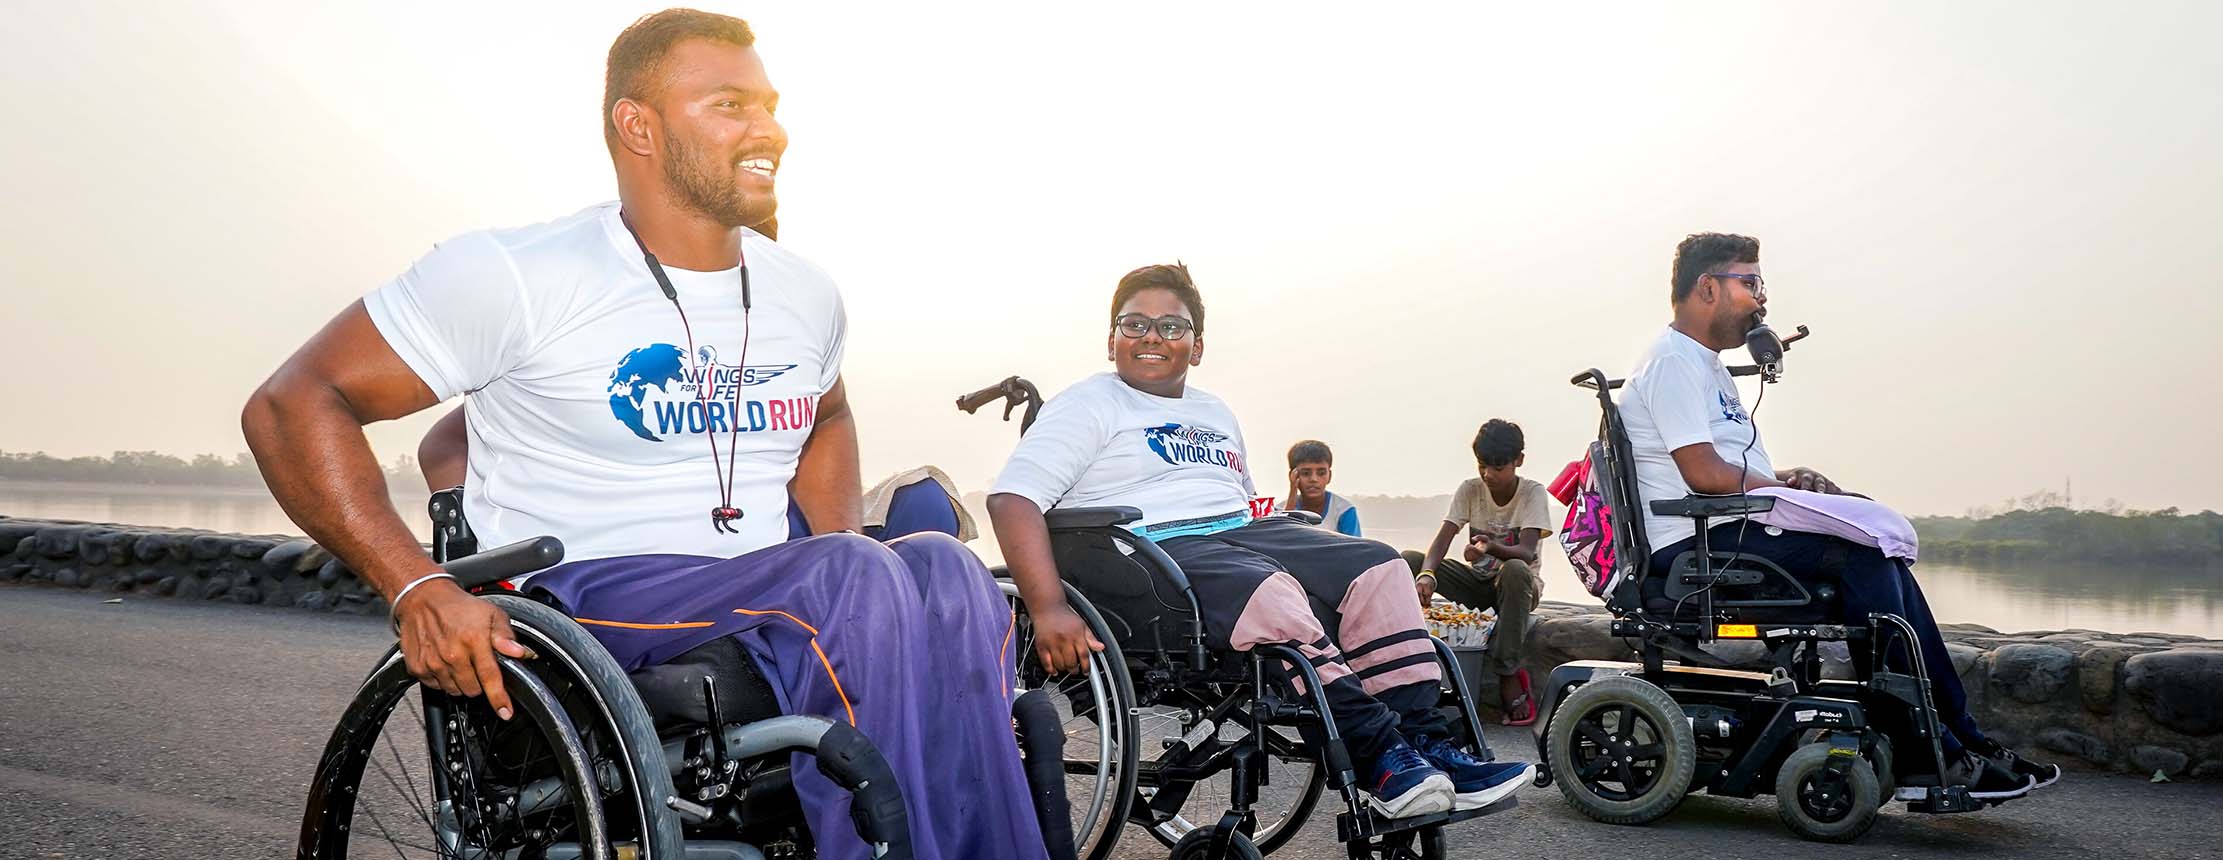 Participants perform during the wings for life world run app run in chandigarh, india